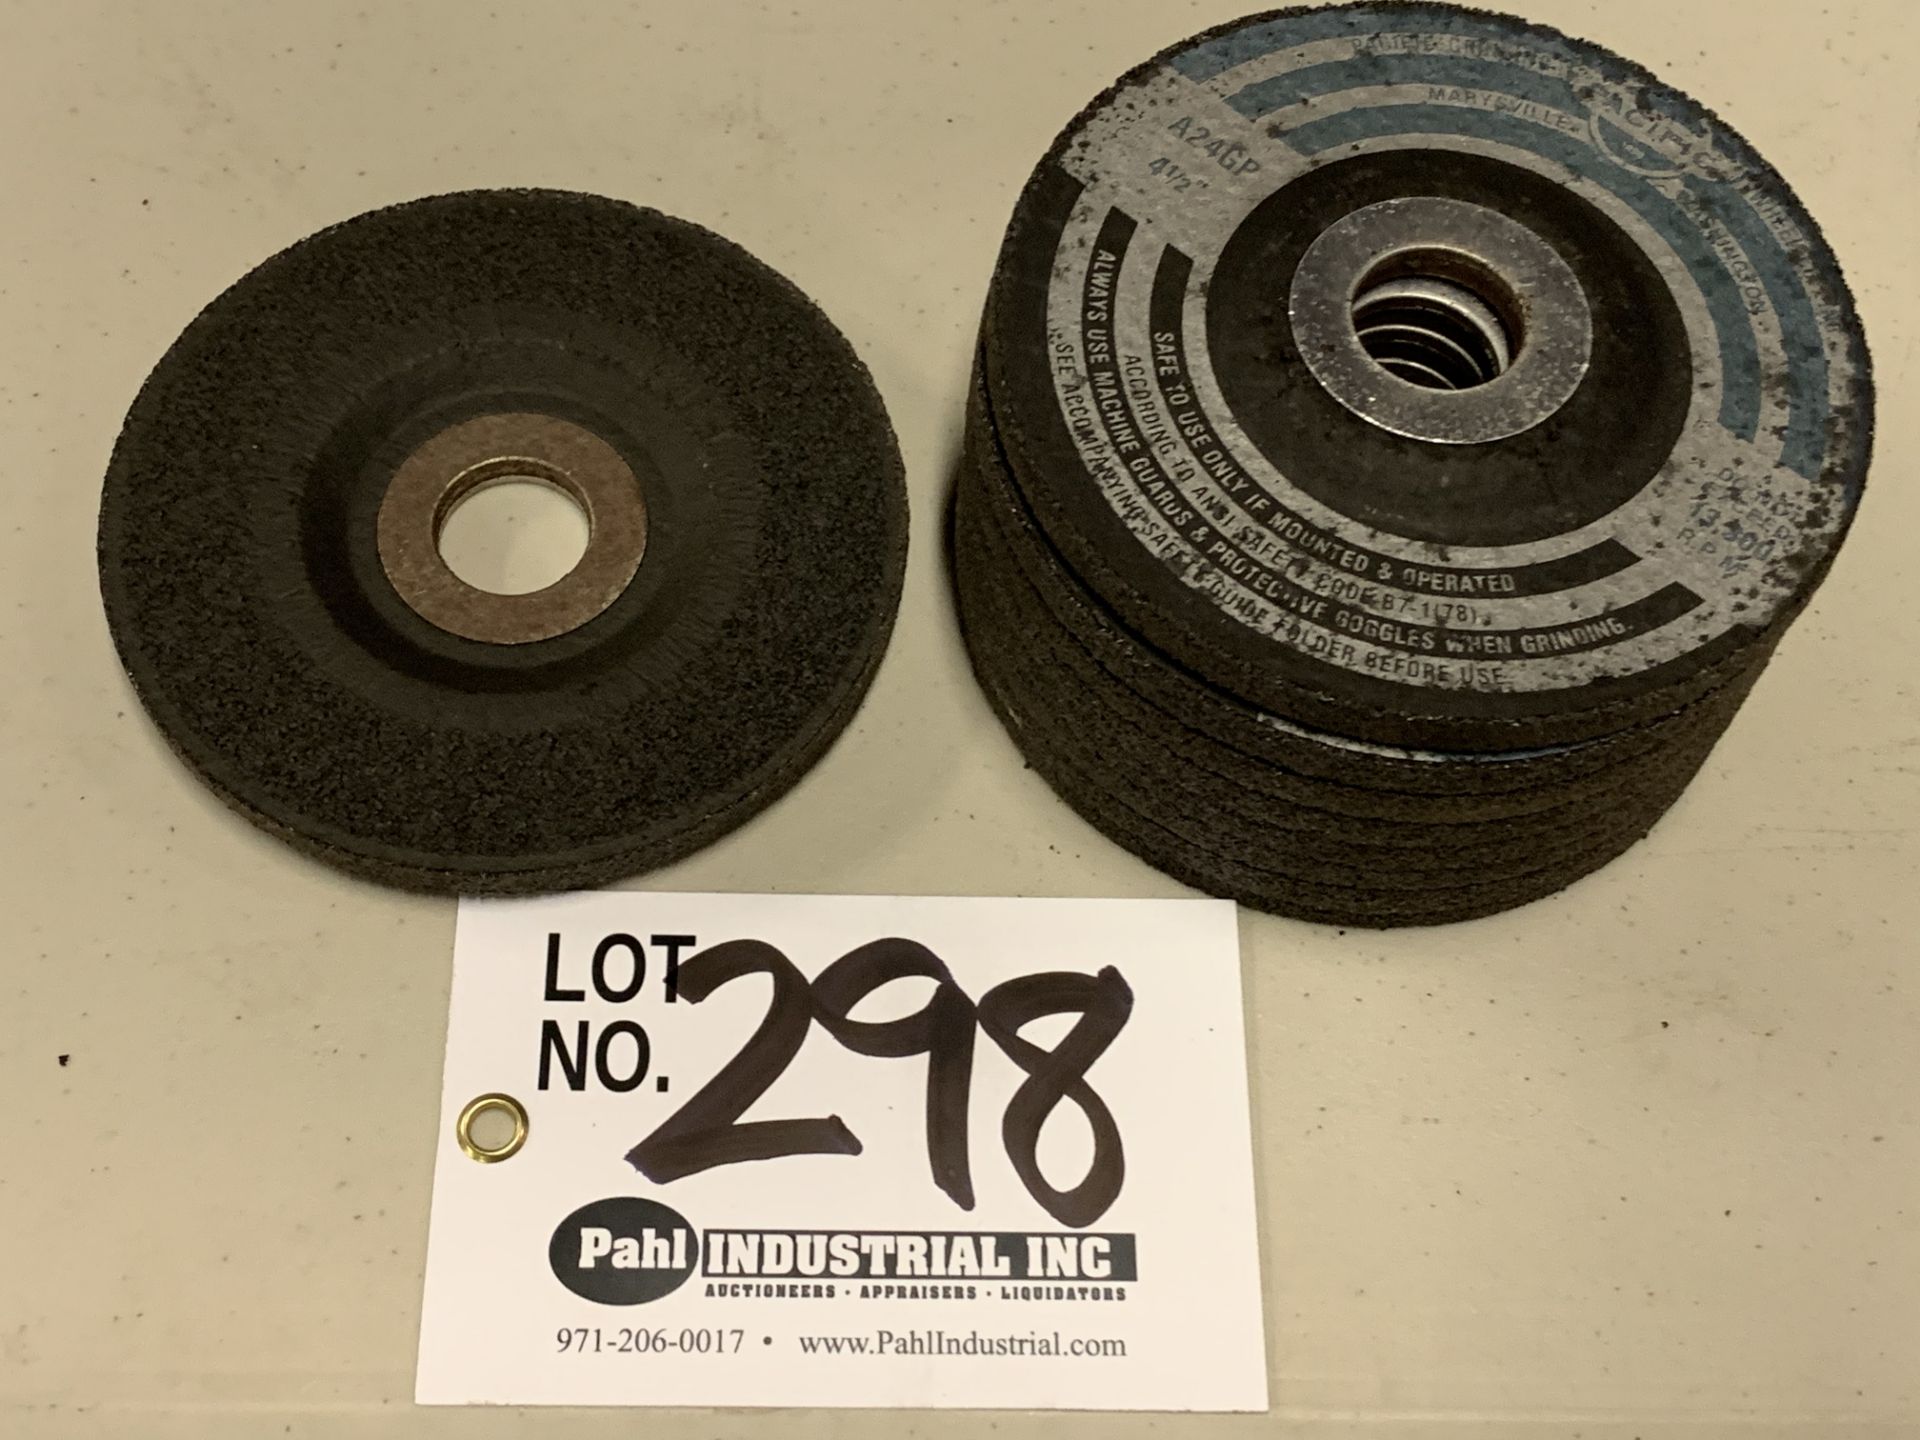 (9) New Pacific 4 1/2" Grinding Wheels A24GP